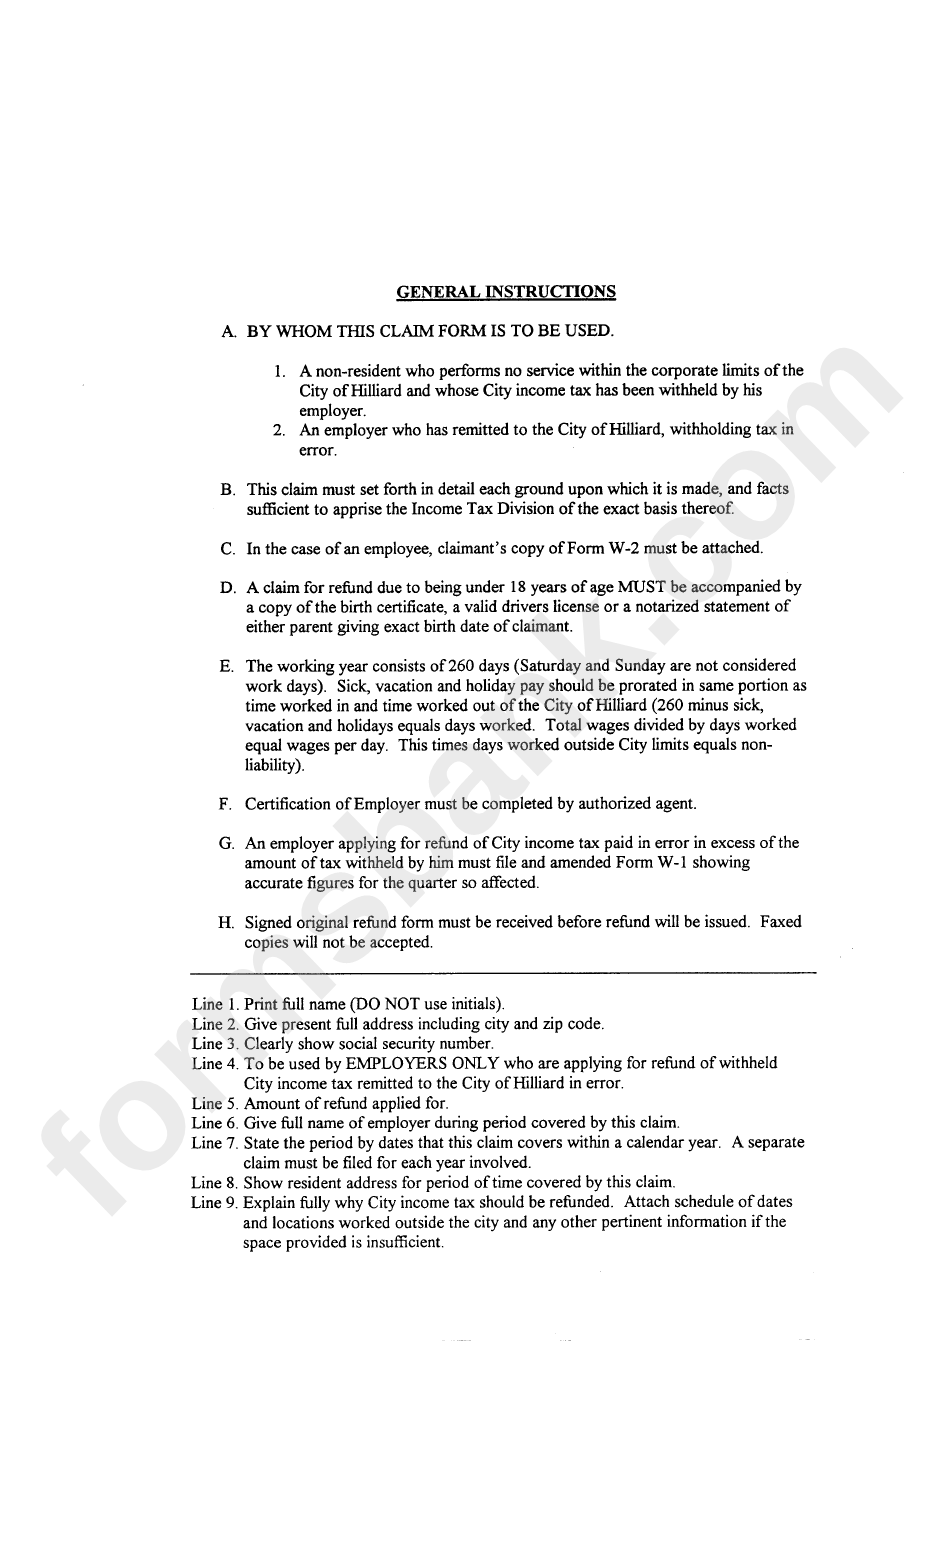 City Of Hilliard Claim Form Instructions